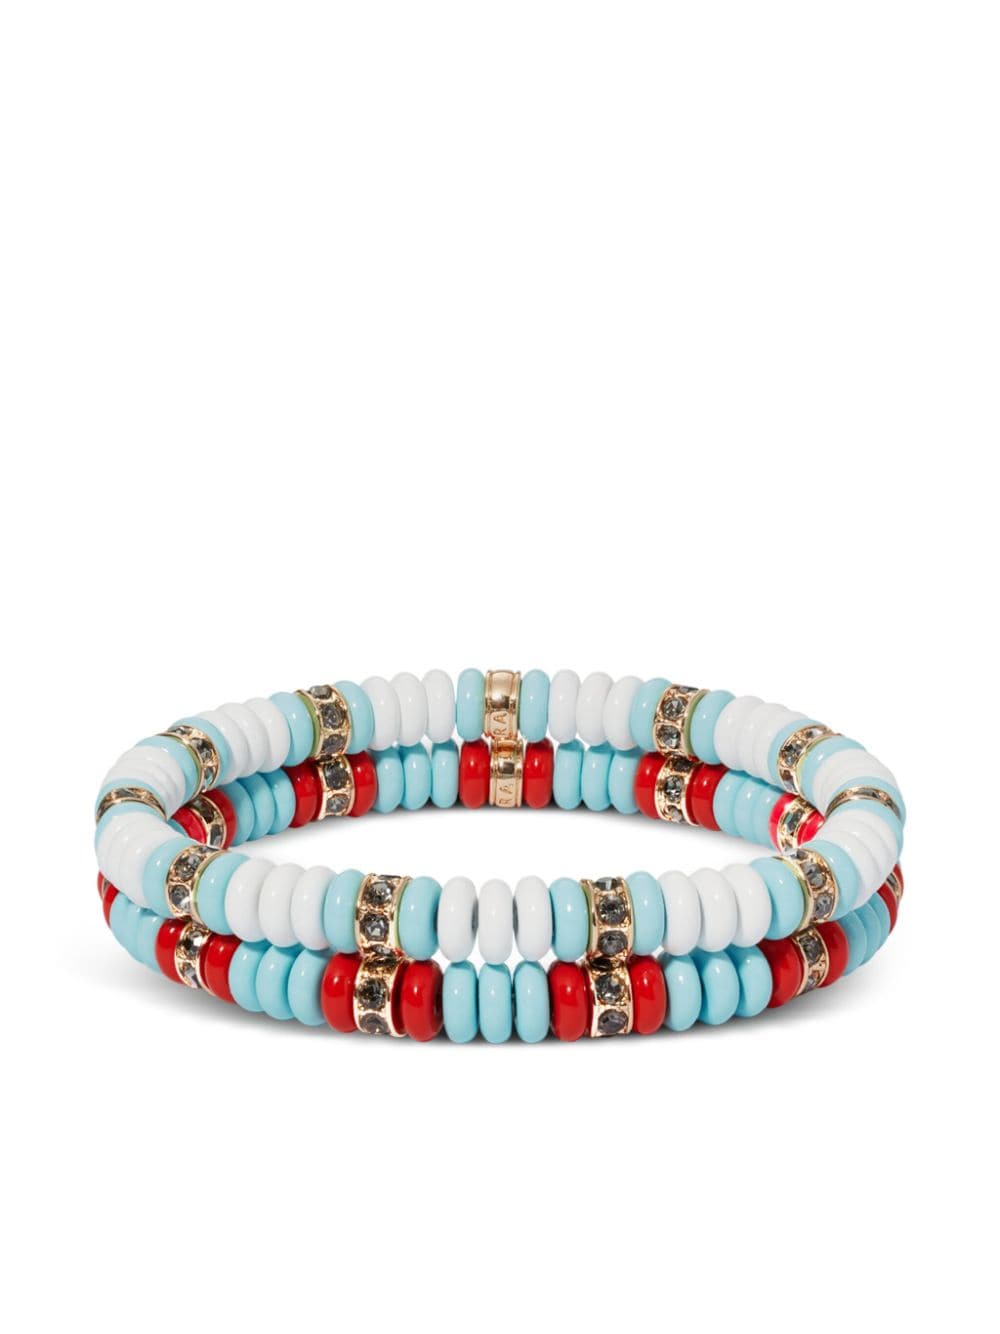 Roxanne Assoulin The Independent beaded bracelet (set of two) - Blu